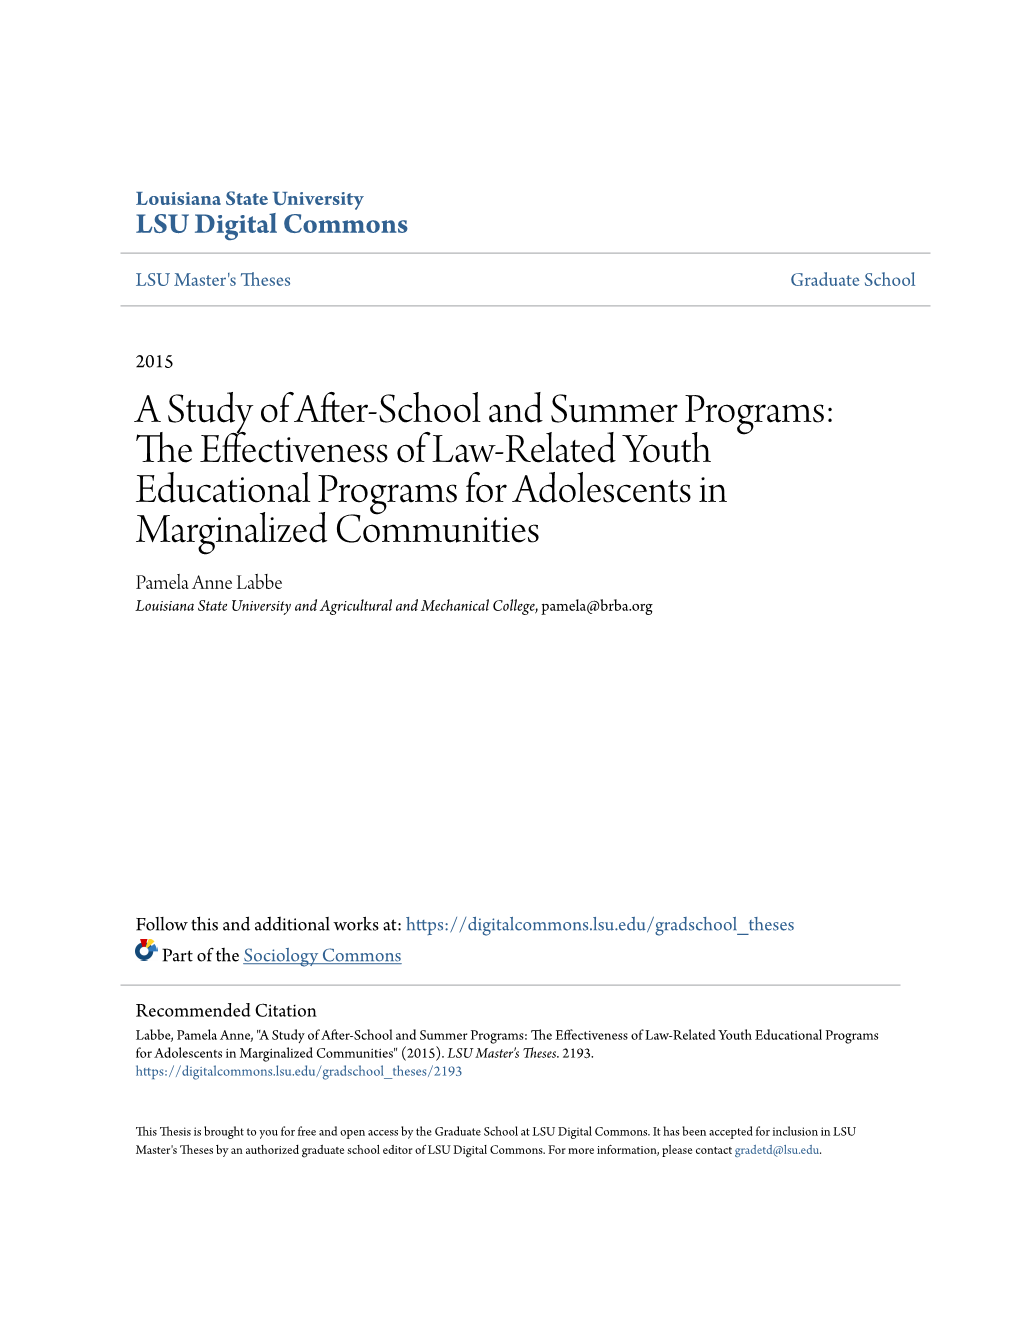 A Study of After-School and Summer Programs: the Effectiveness of Law-Related Youth Educational Programs for Adolescents in Marginalized Communities" (2015)